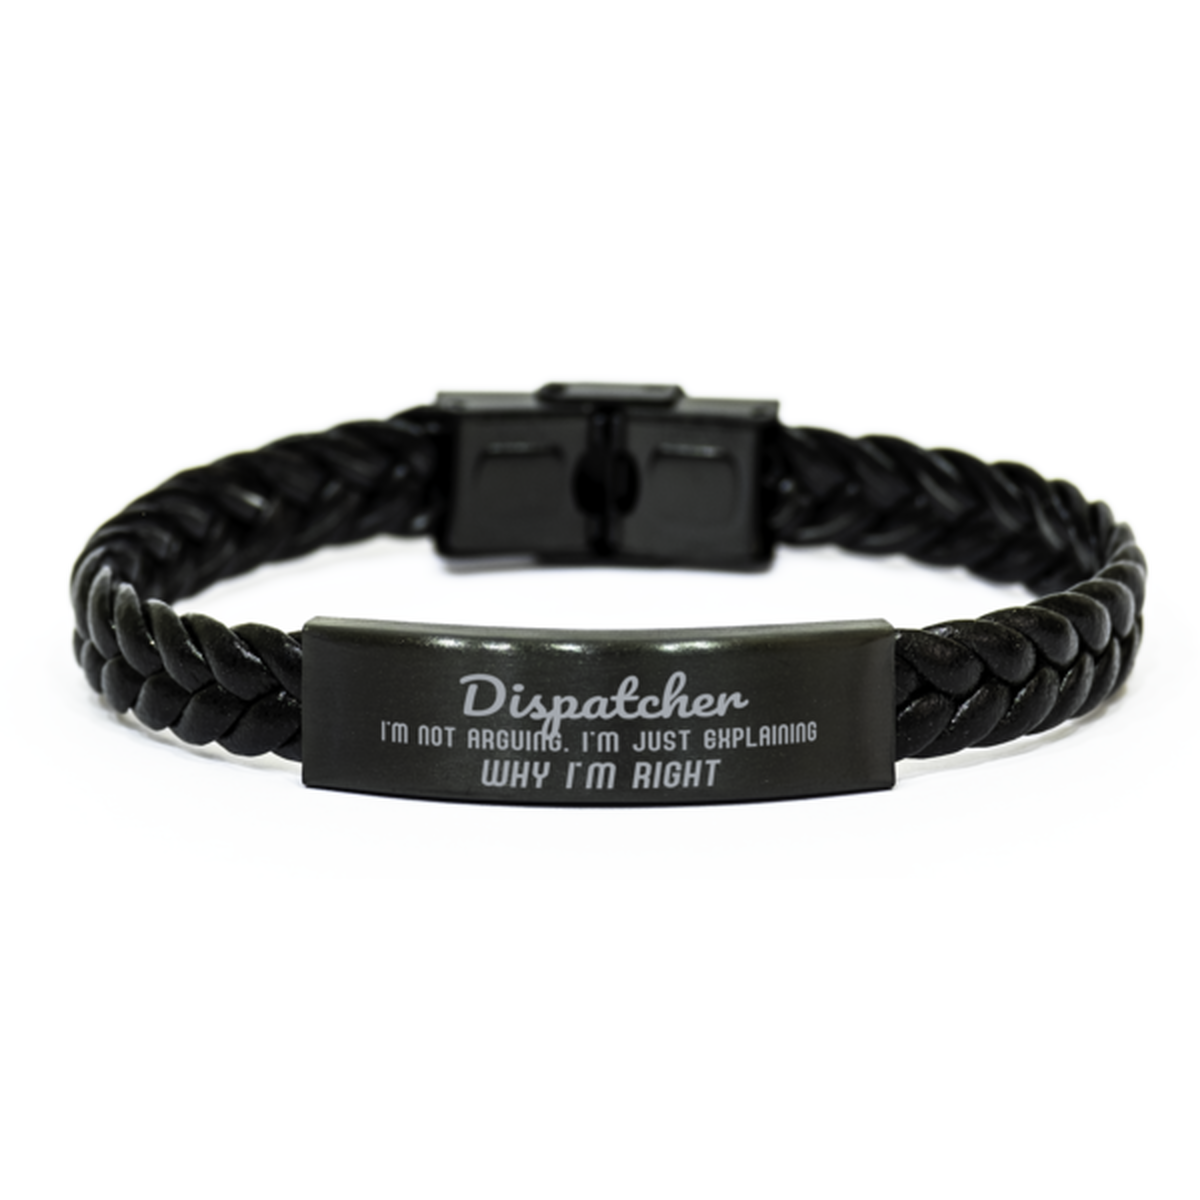 Dispatcher I'm not Arguing. I'm Just Explaining Why I'm RIGHT Braided Leather Bracelet, Graduation Birthday Christmas Dispatcher Gifts For Dispatcher Funny Saying Quote Present for Men Women Coworker